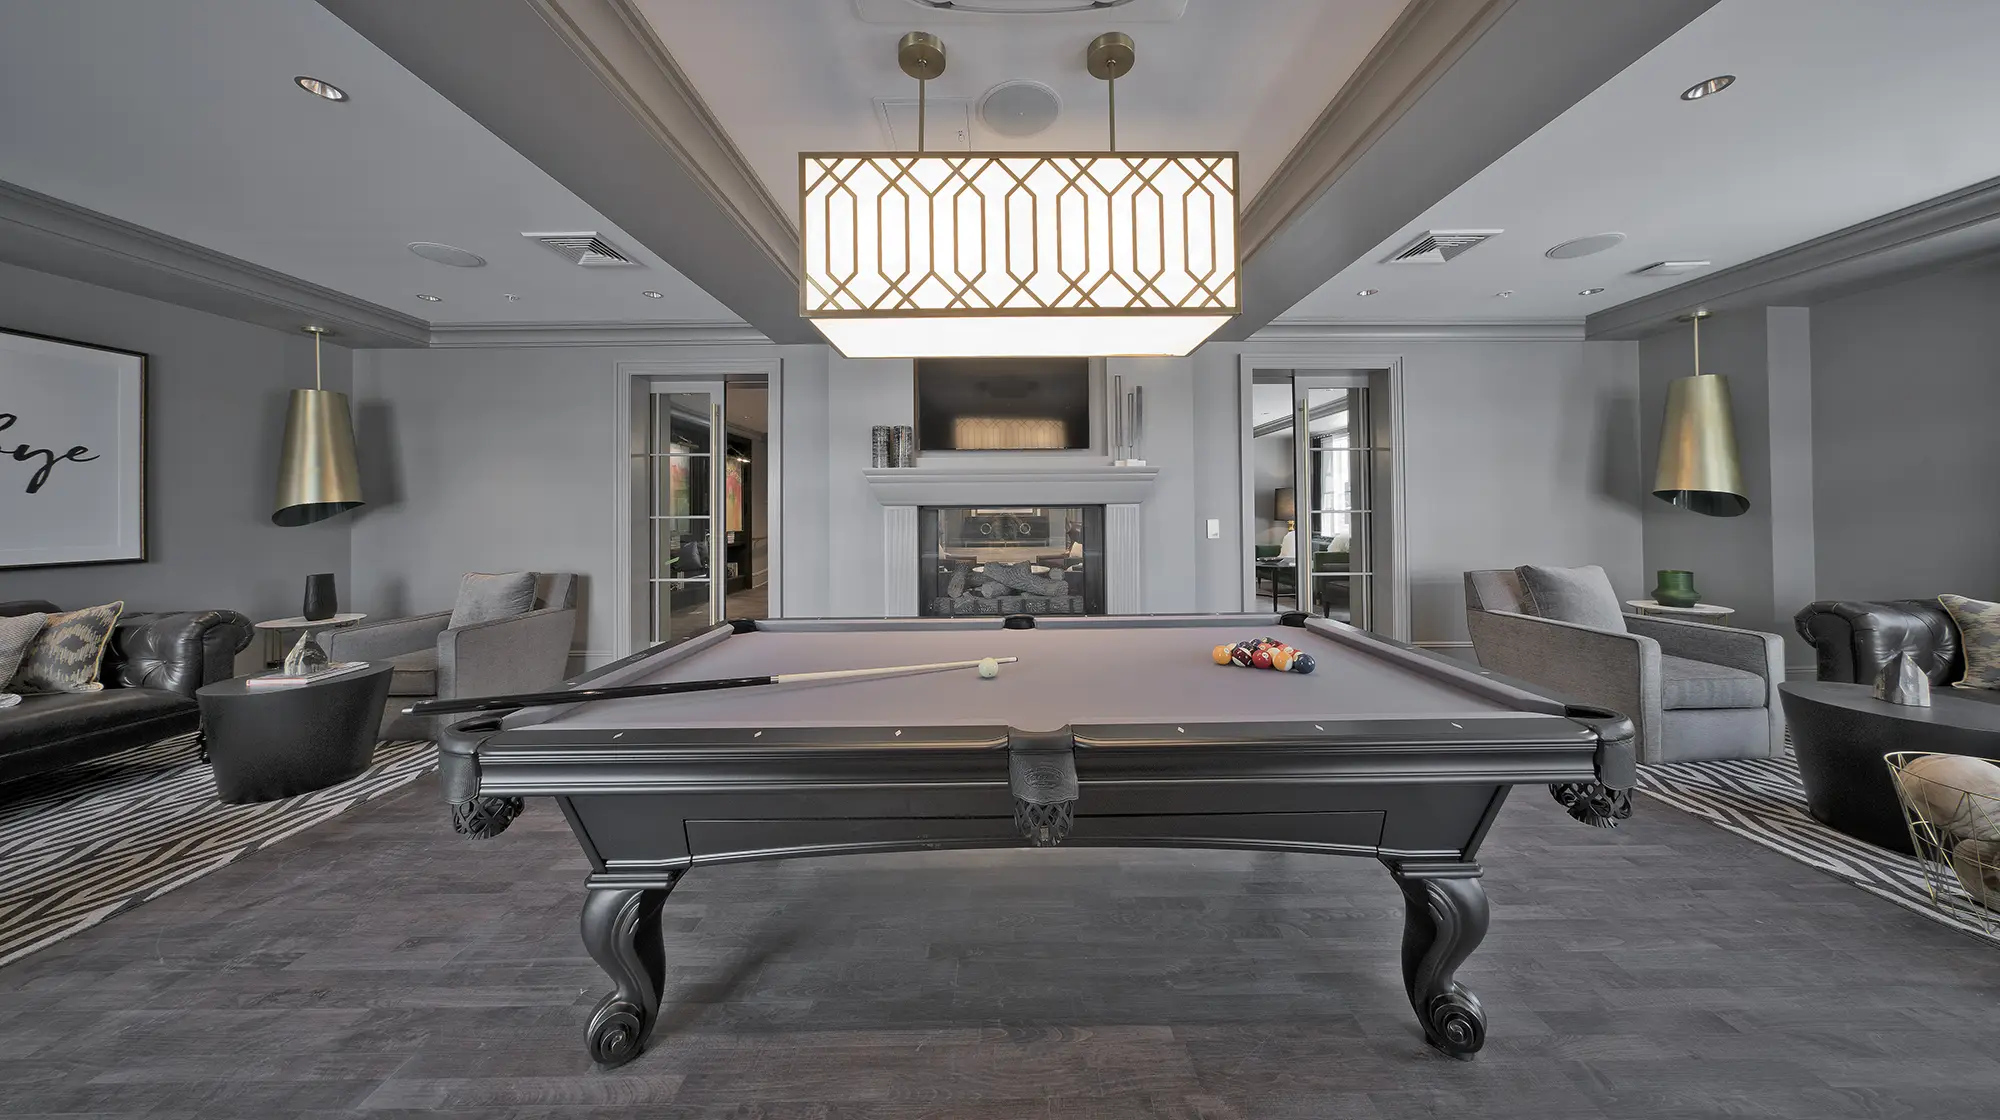 Clubhouse with lounge seating, pool table, and tv